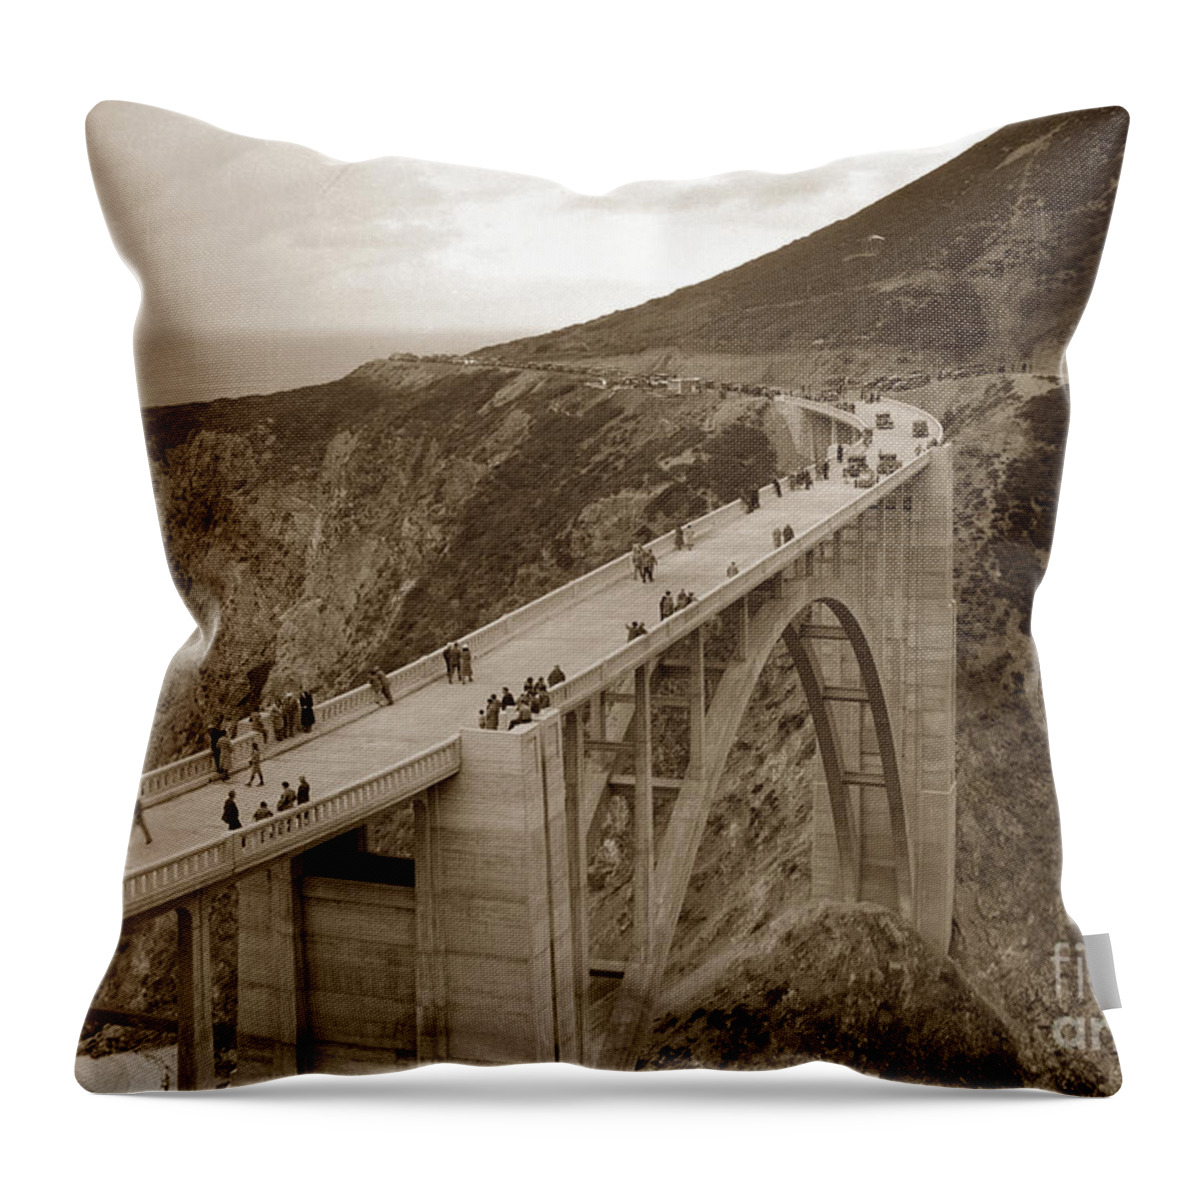 November Throw Pillow featuring the photograph Bixby Creek Bridge Big Sur opening day November 27 1932 by Monterey County Historical Society